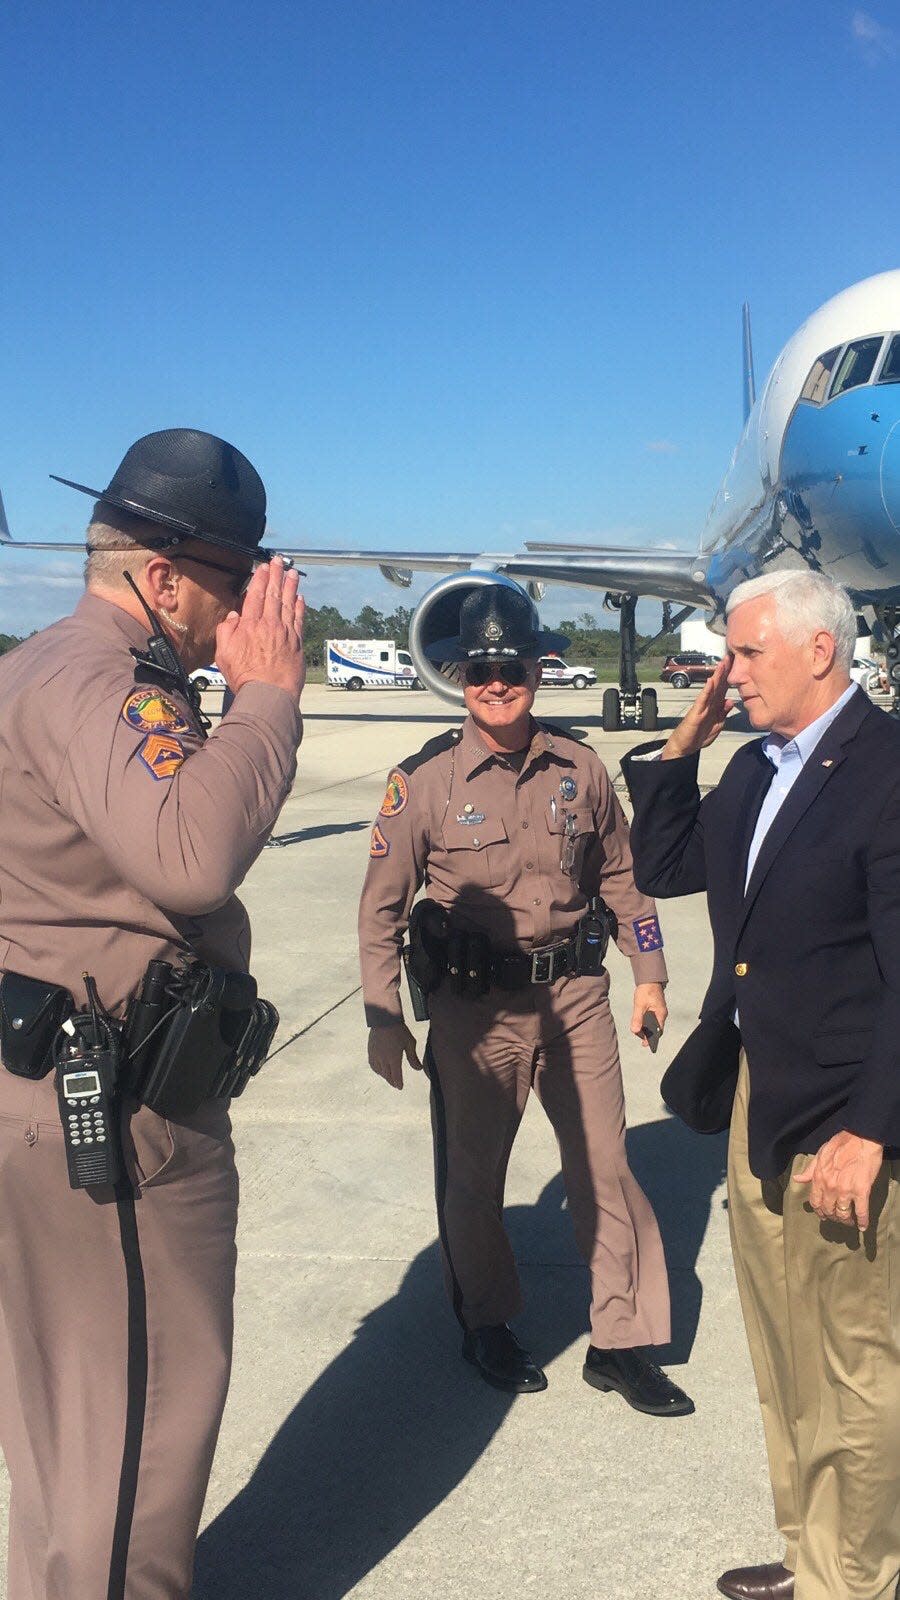 A Florida Highway Patrol trooper from FHP's Fort Myers' headquarters offers then-Vice President Mike Pence a salute as he prepares to leave Southwest Florida International Airport after a 2019 weekend visit on Sanibel Island.